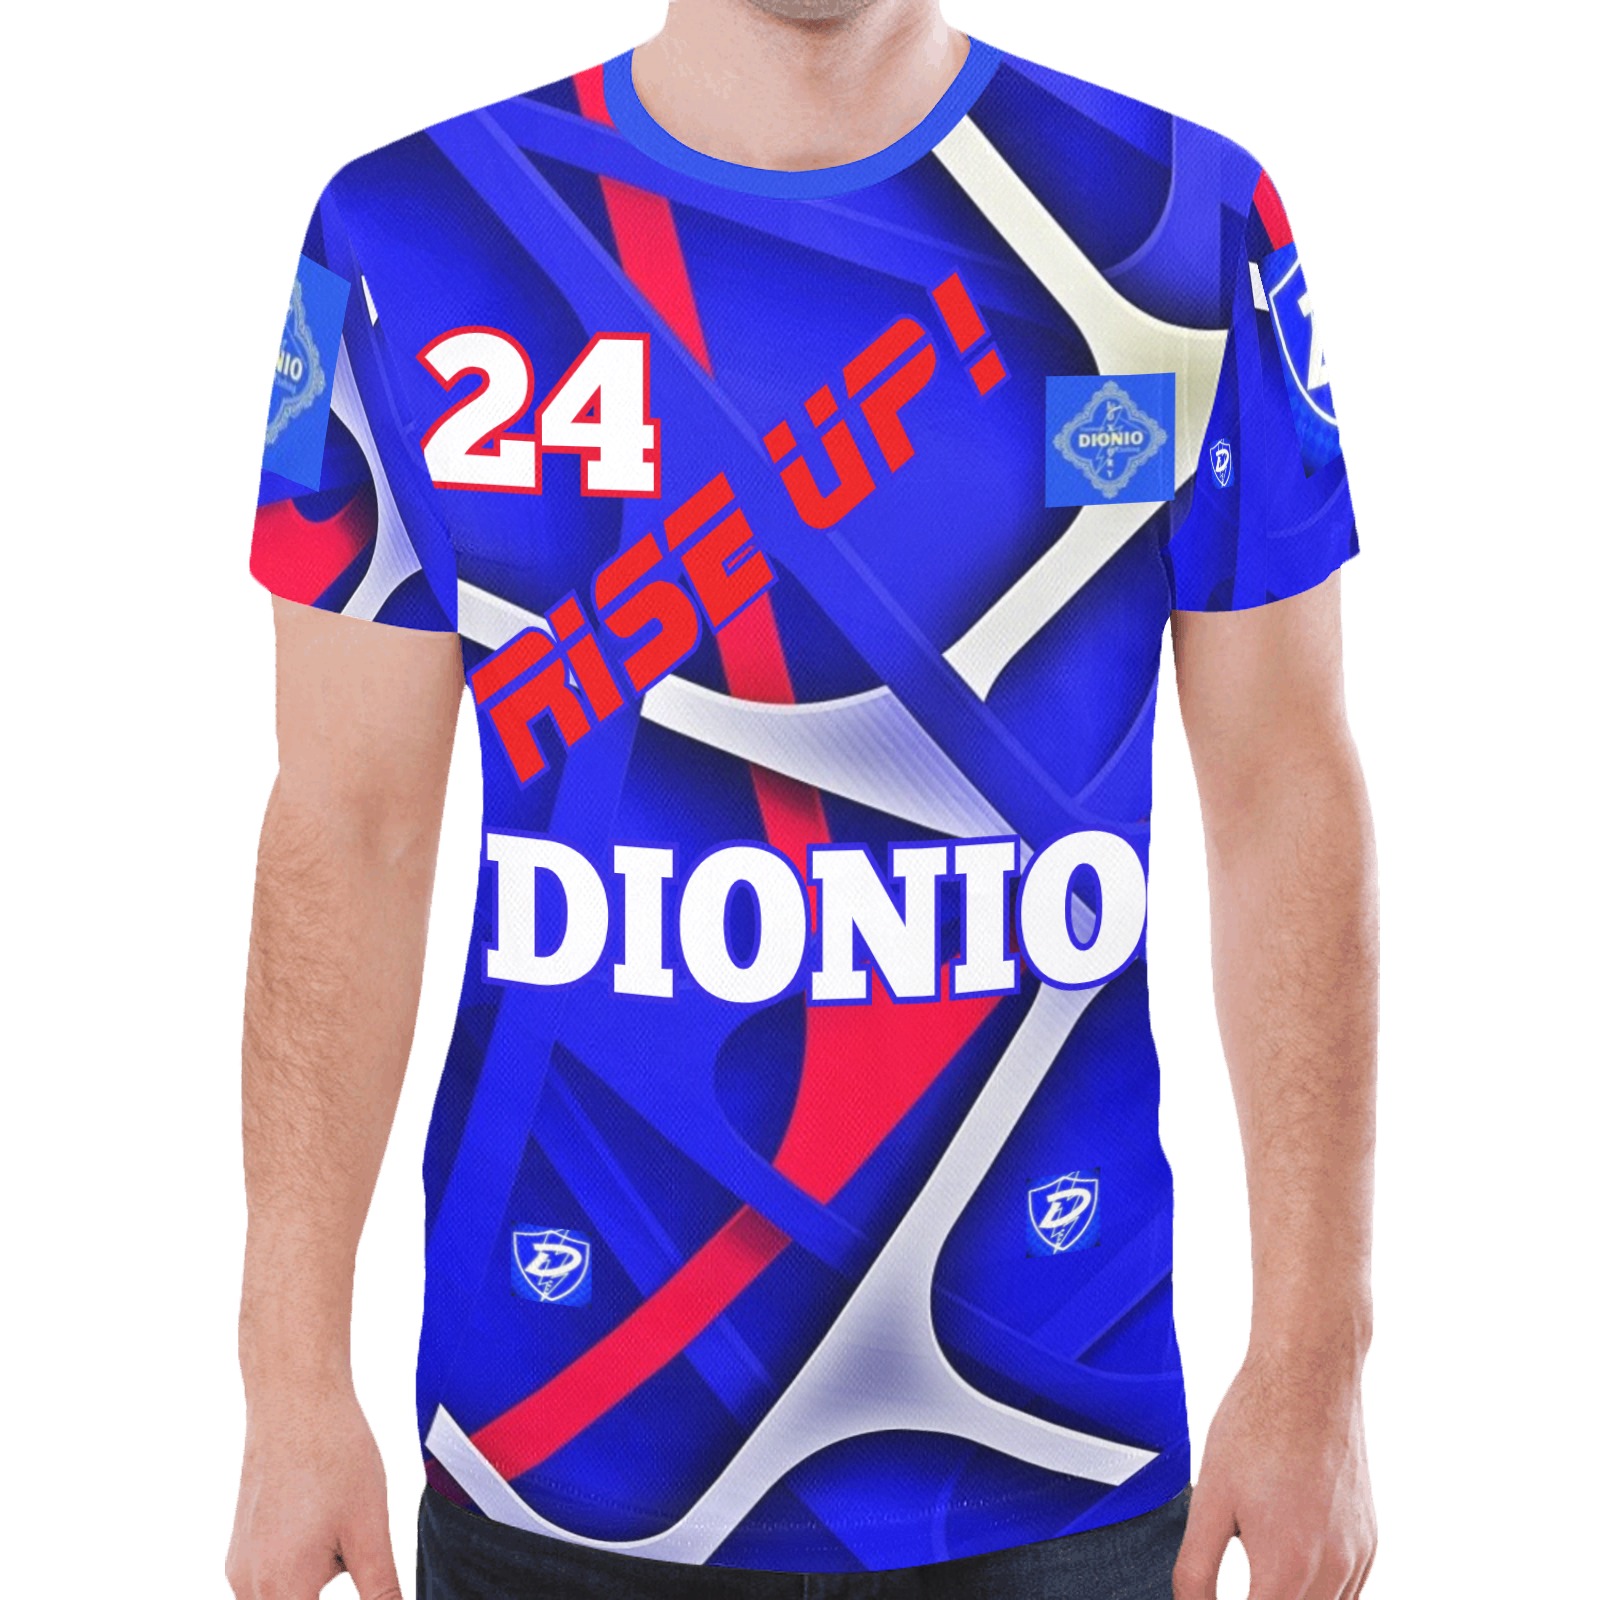 DIONIO Clothing - RISE UP! T-Shirt/Jersey (Blue, White & Red) New All Over Print T-shirt for Men (Model T45)